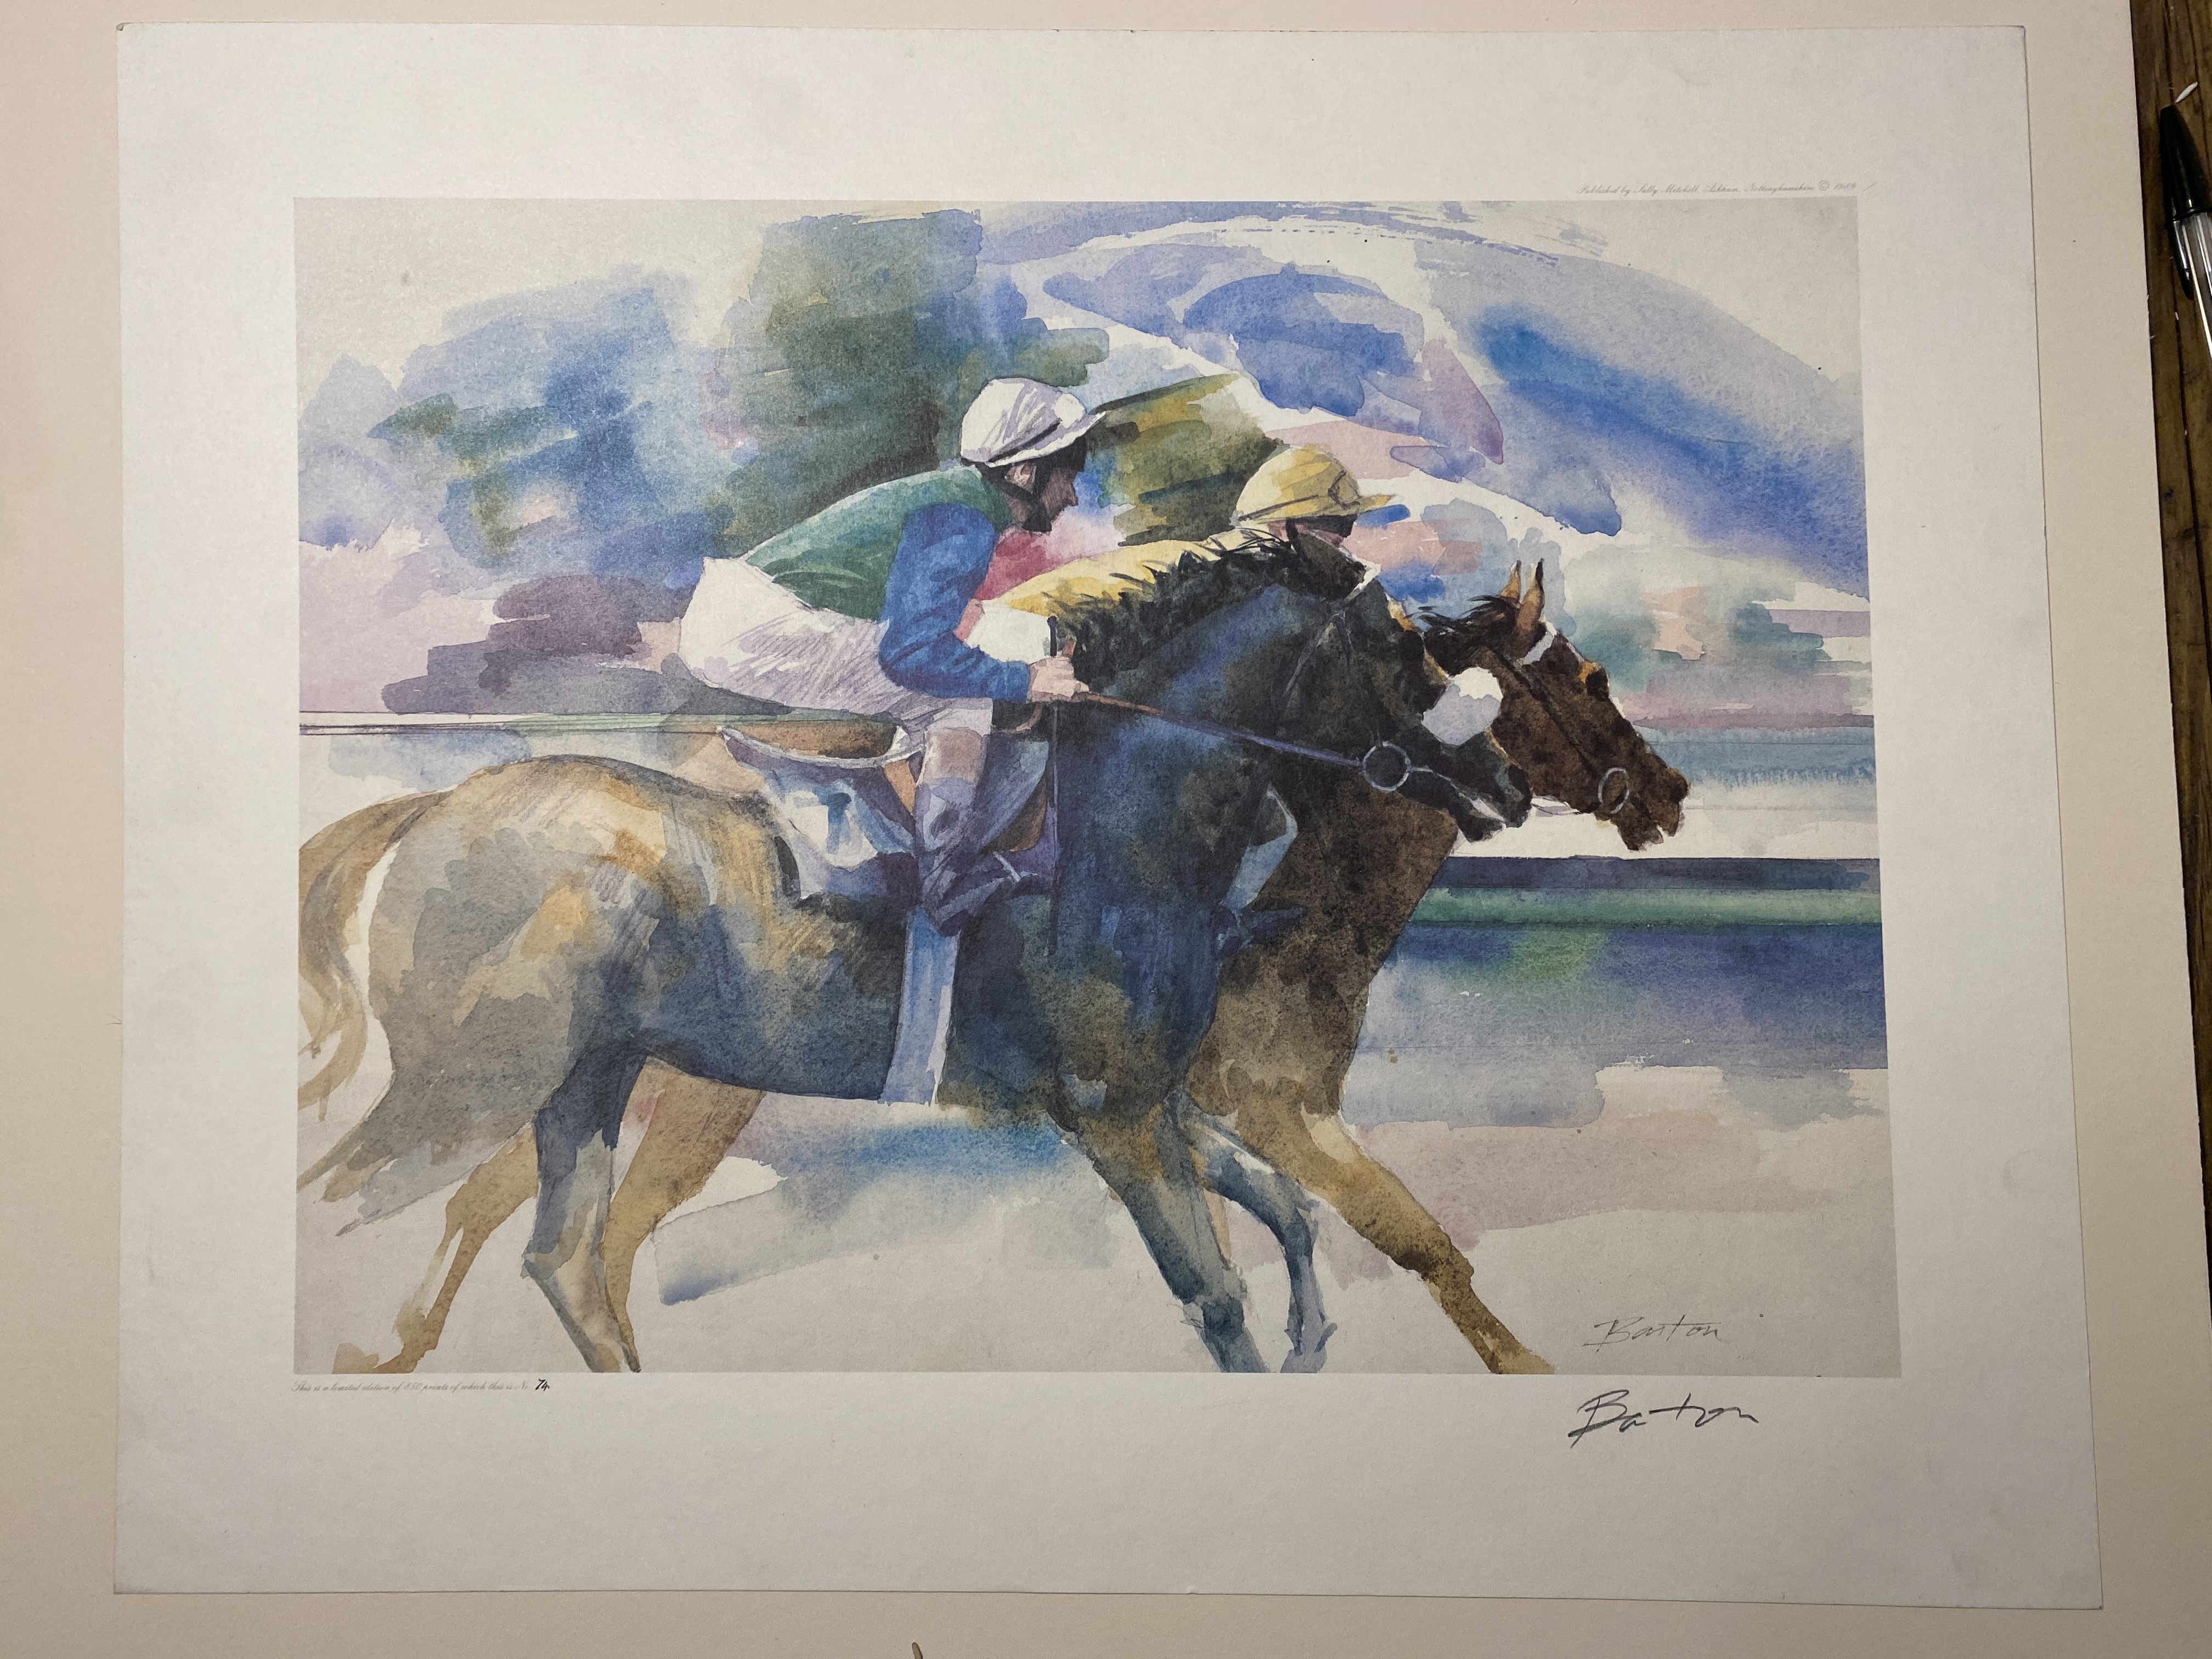 Barton Signed Horse Racing Limited Edition Print 1989